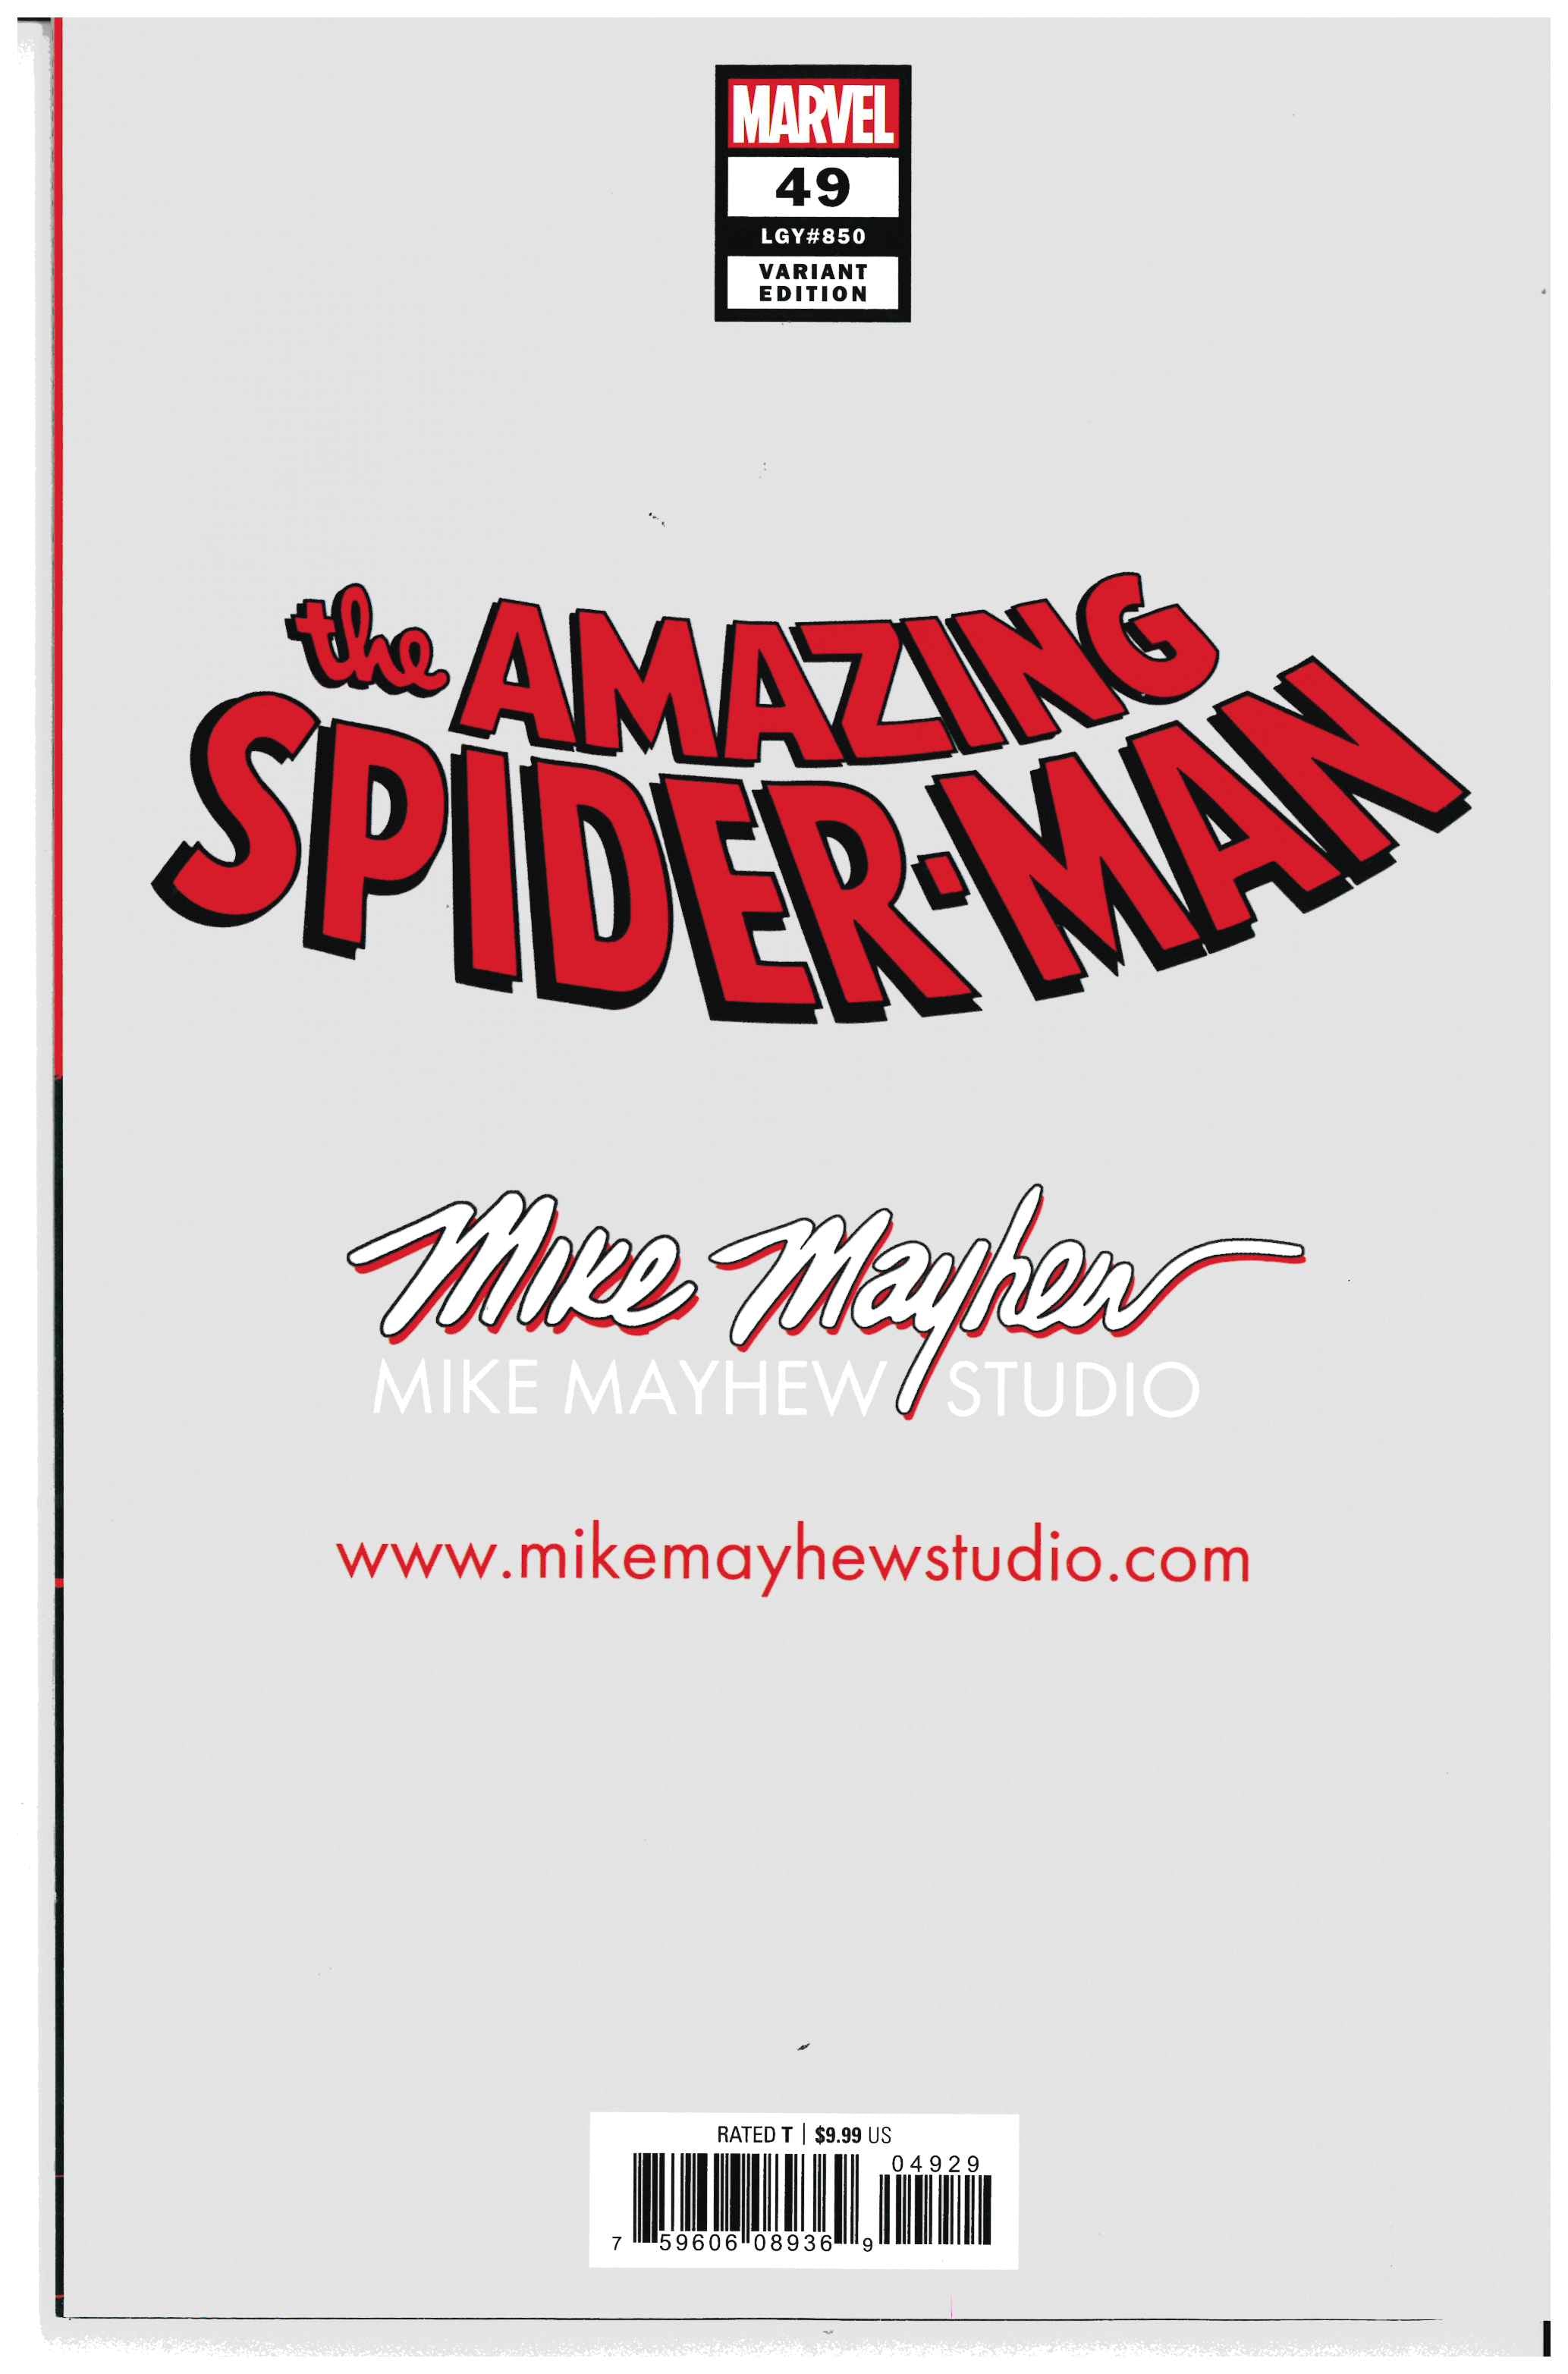 Amazing Spider-Man #49/850 | Signed by Mike Mayhew backside